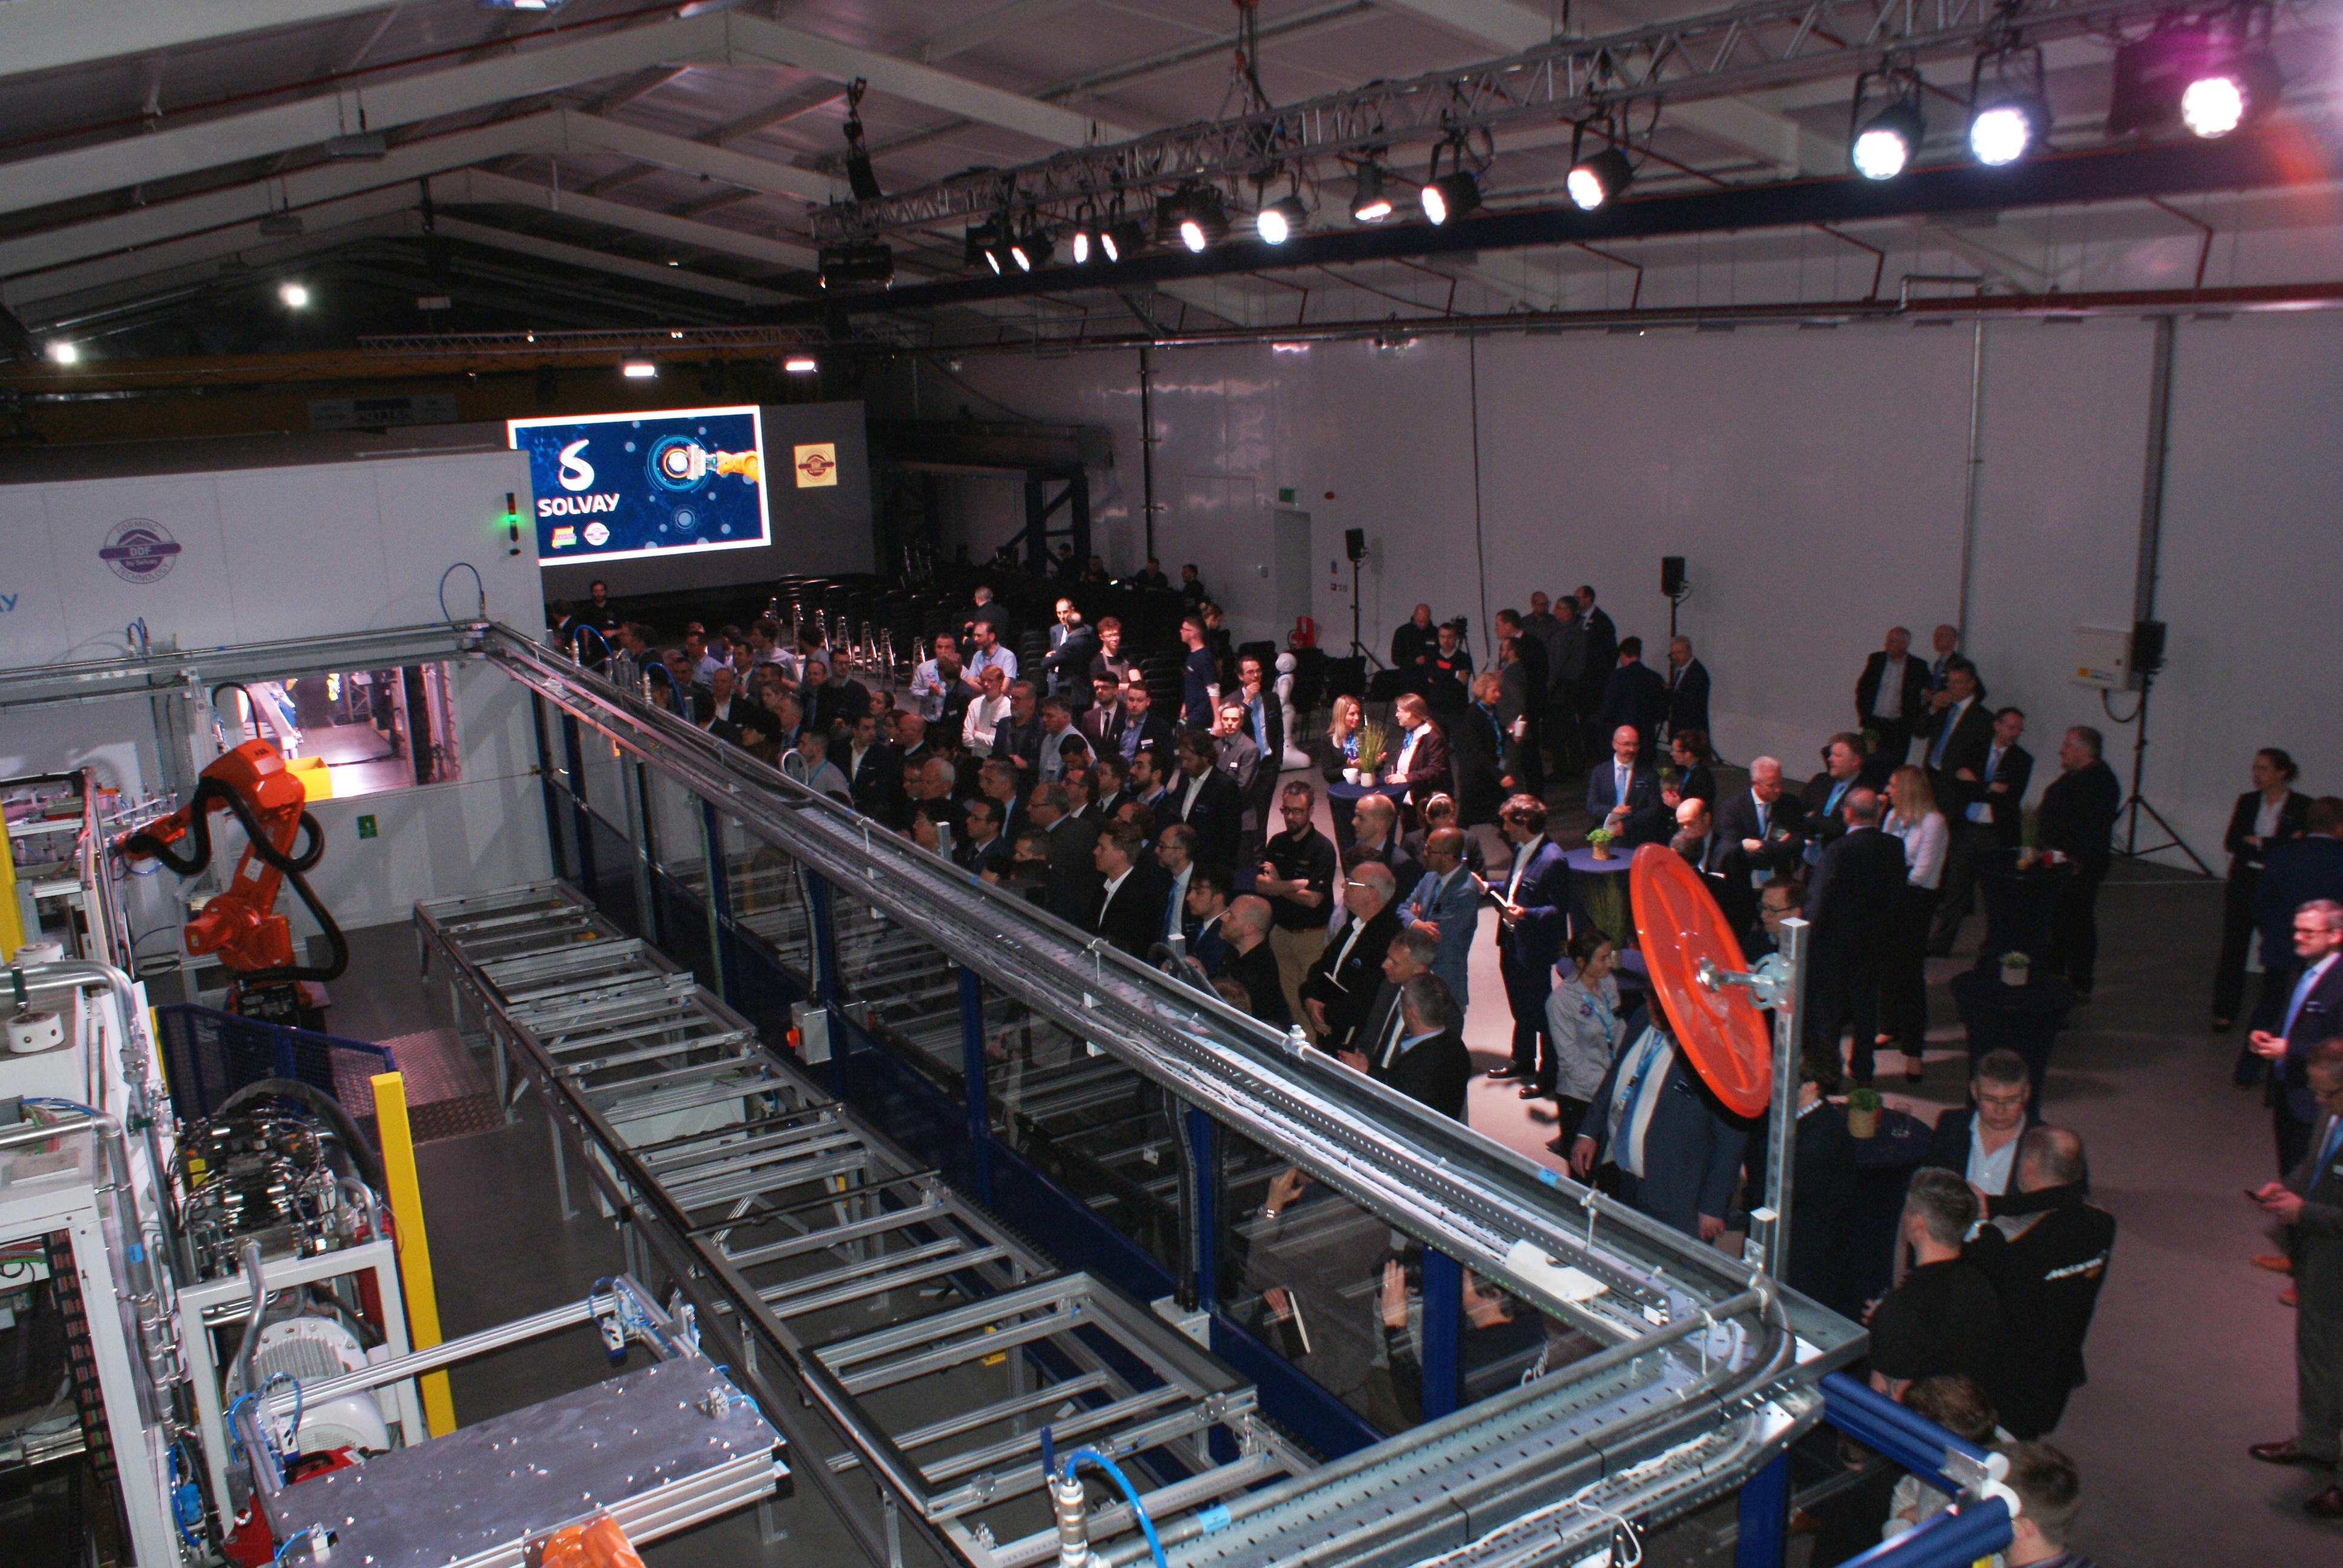 During a customer event, Solvay unveiled the new demonstrator line.